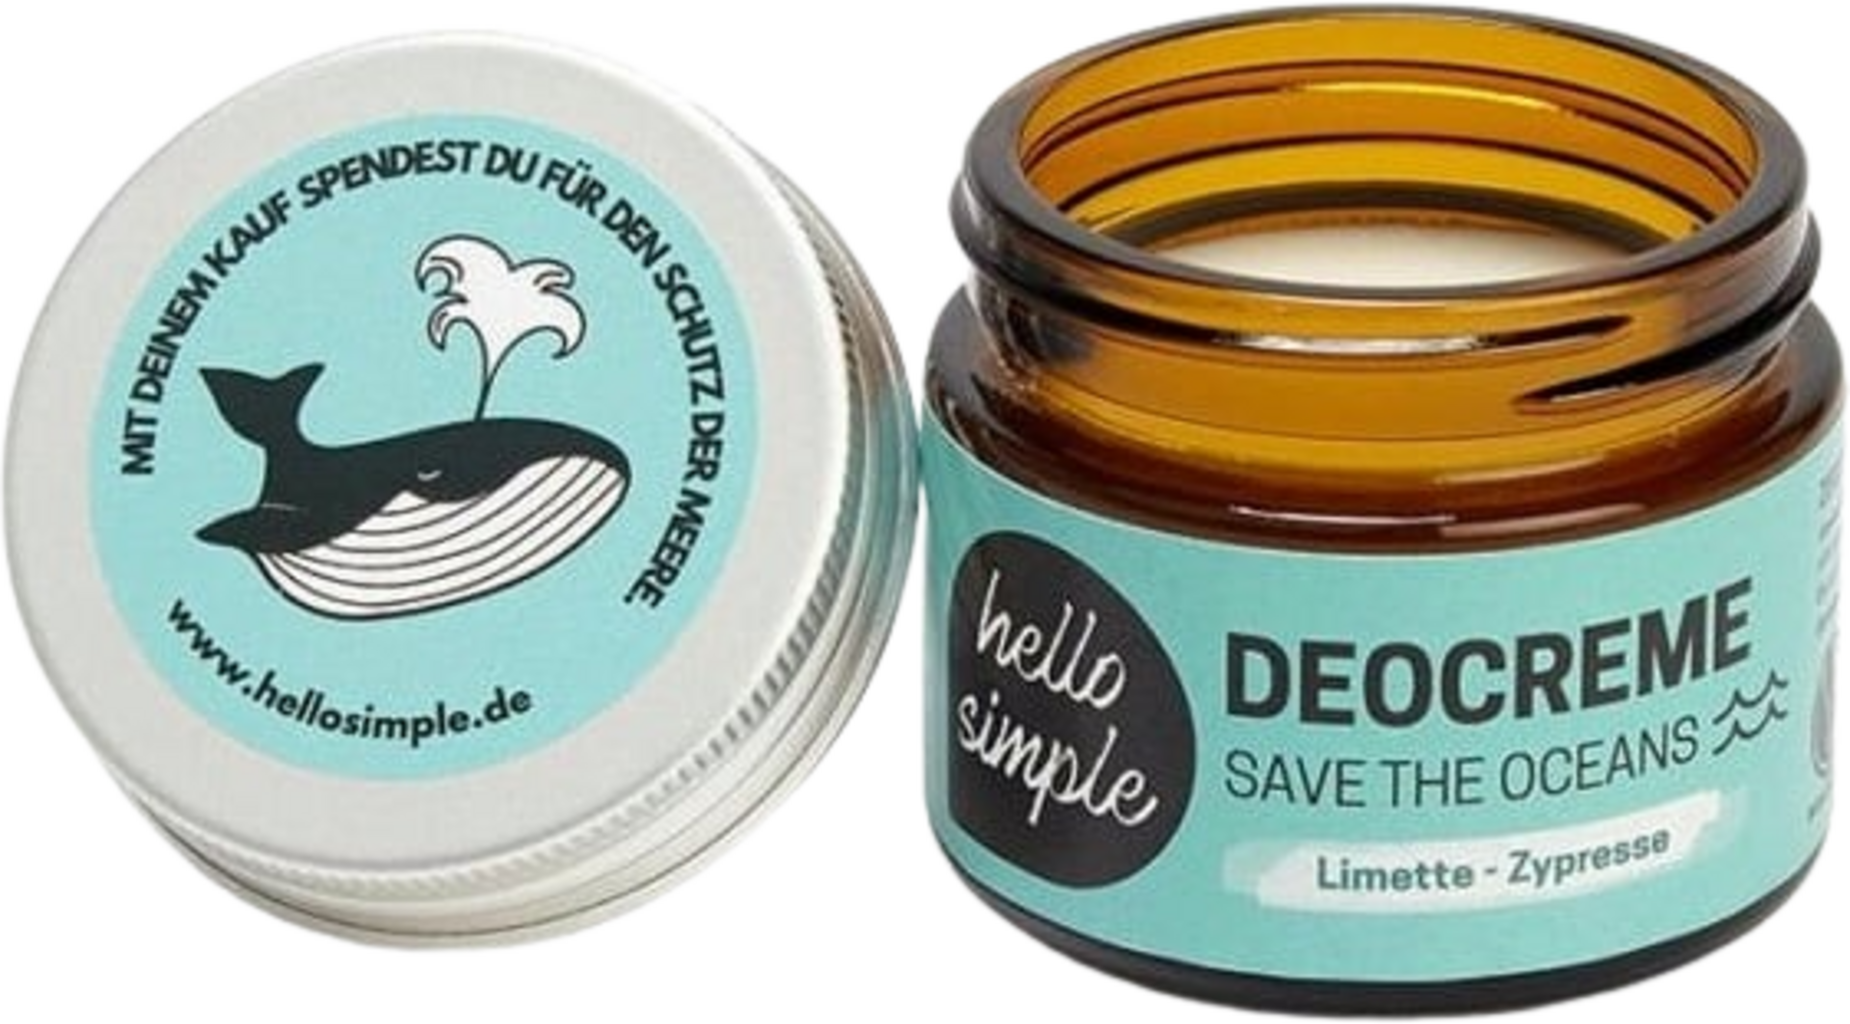 hello simple "Save the Oceans" Deocreme Limette Zypresse - 50 g